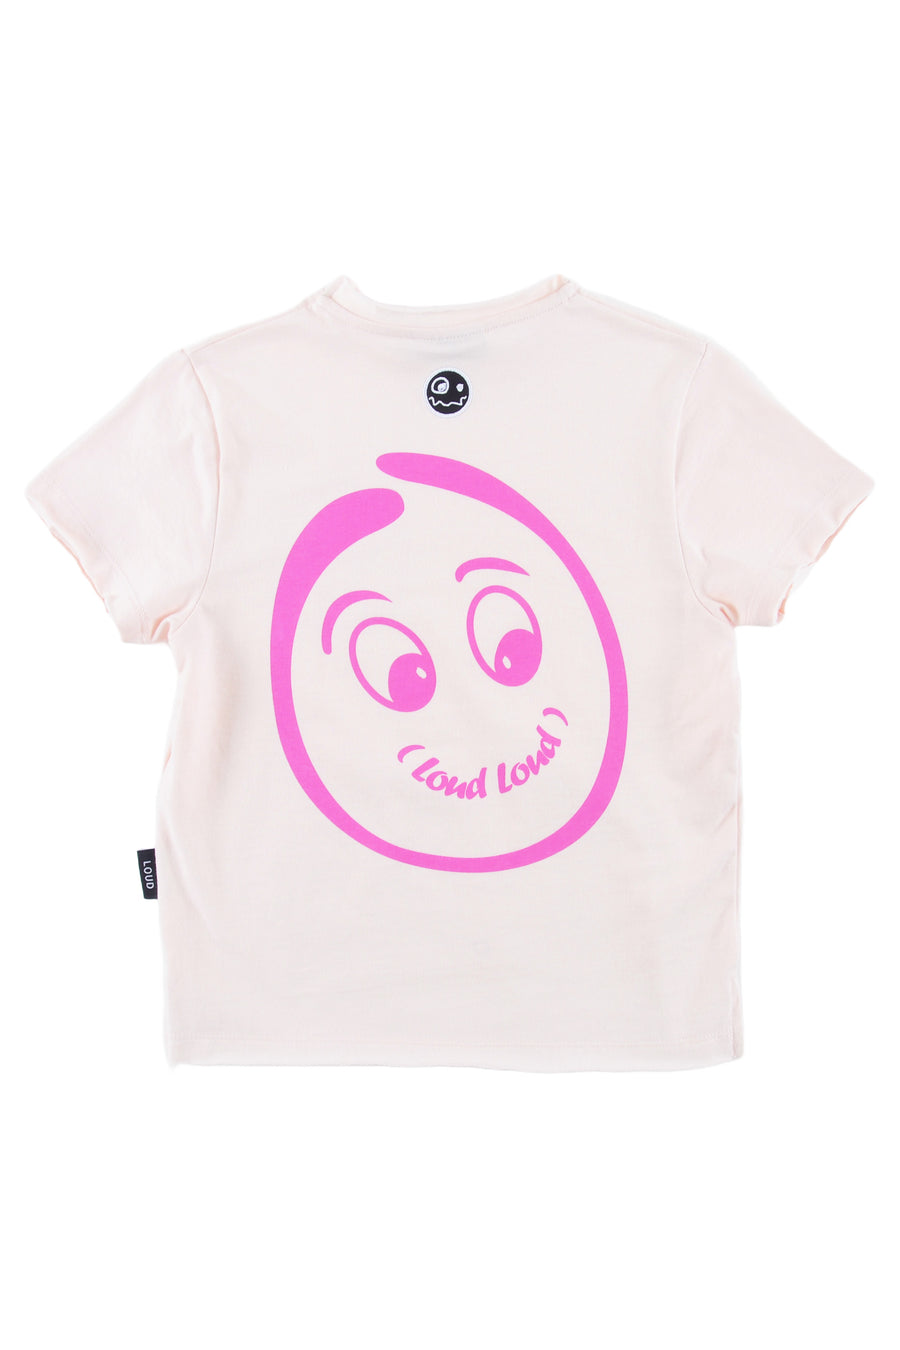 Soft pink t-shirt by Loud